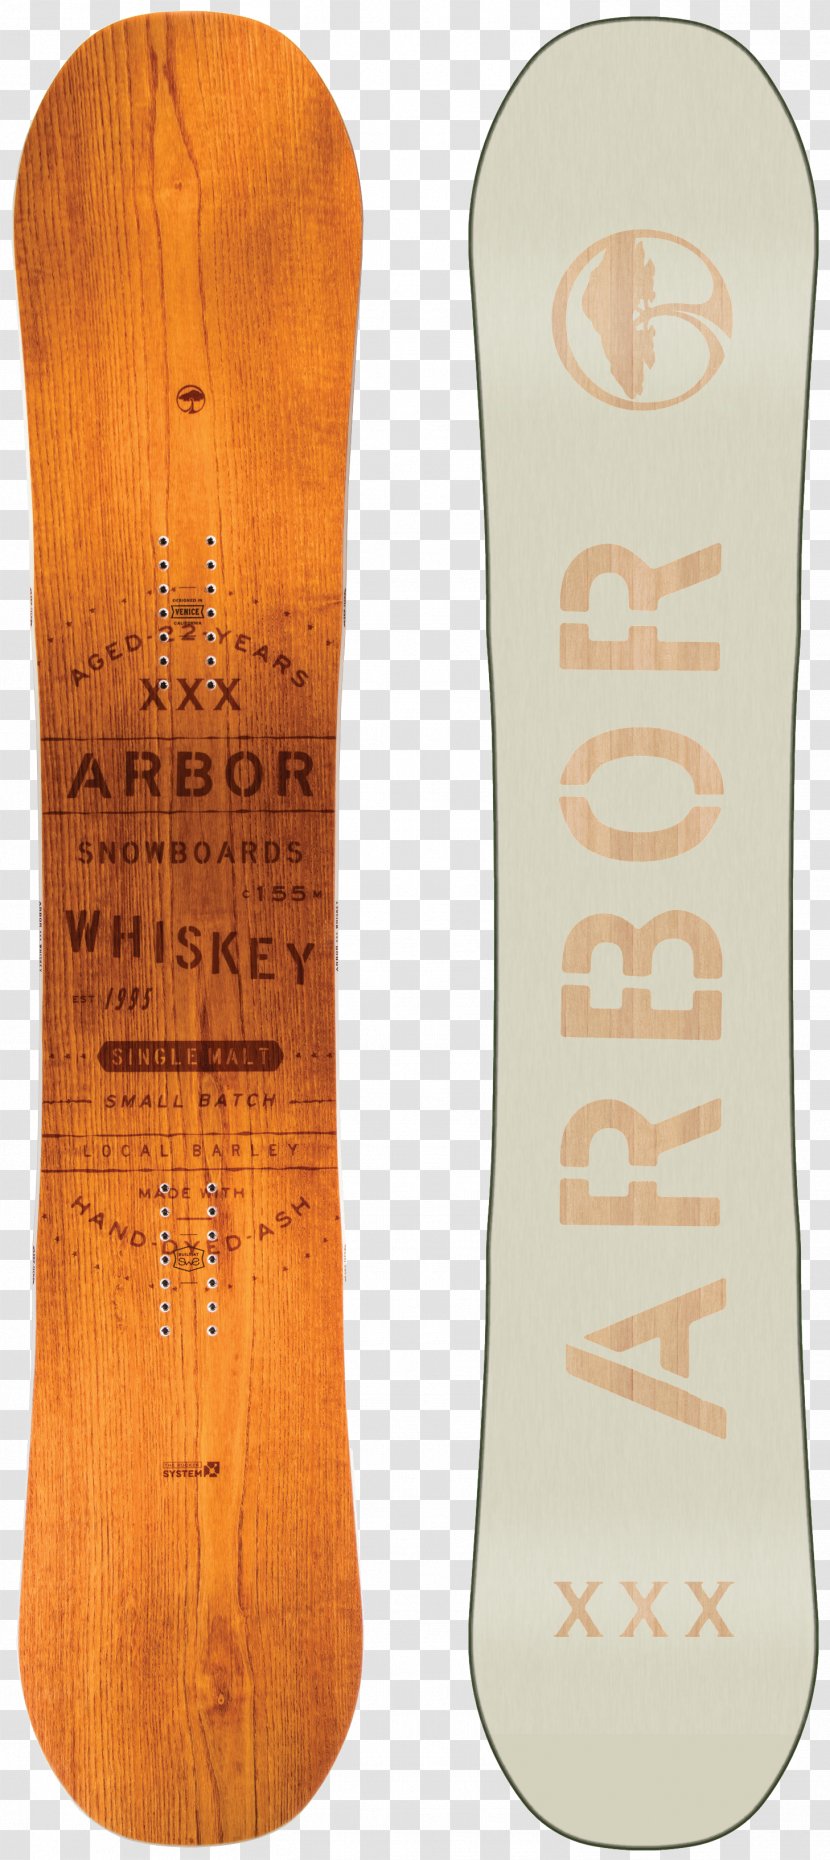 Snowboarding Arbor Whiskey (2016) Lib Technologies - Baseg Outdoor - Day 312 Transparent PNG